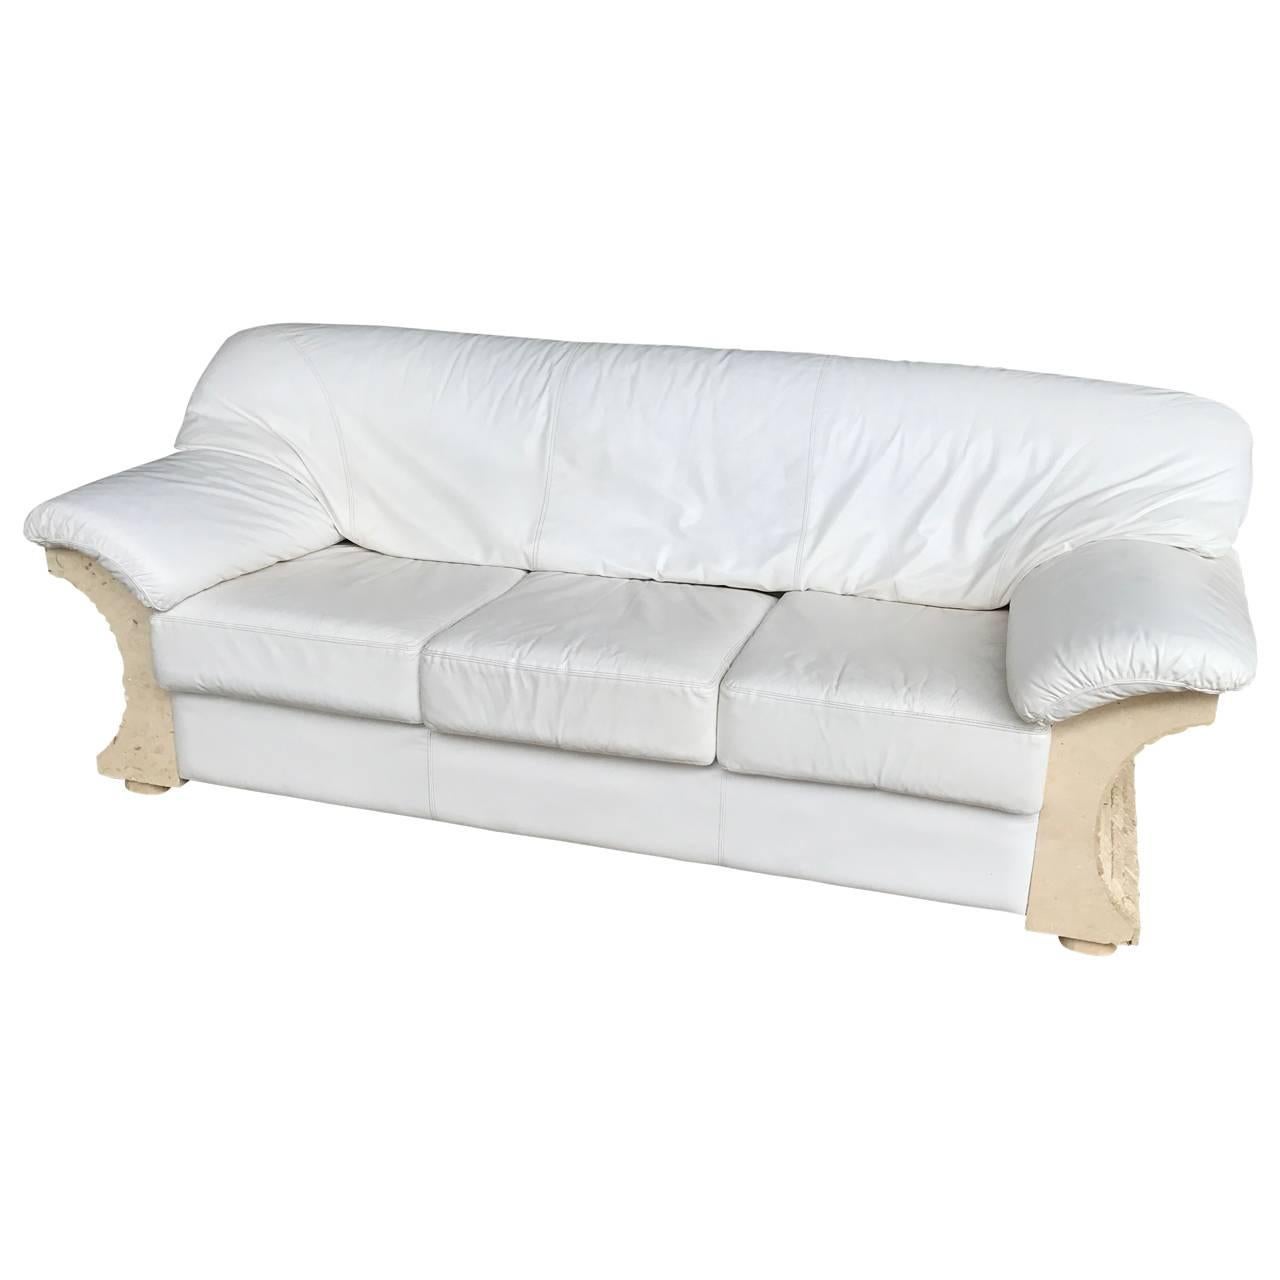 High quality three-person sofa with tessellated marble veneer and rough brick-like sides. The thick white leather pillows are secured with velcro stripes.